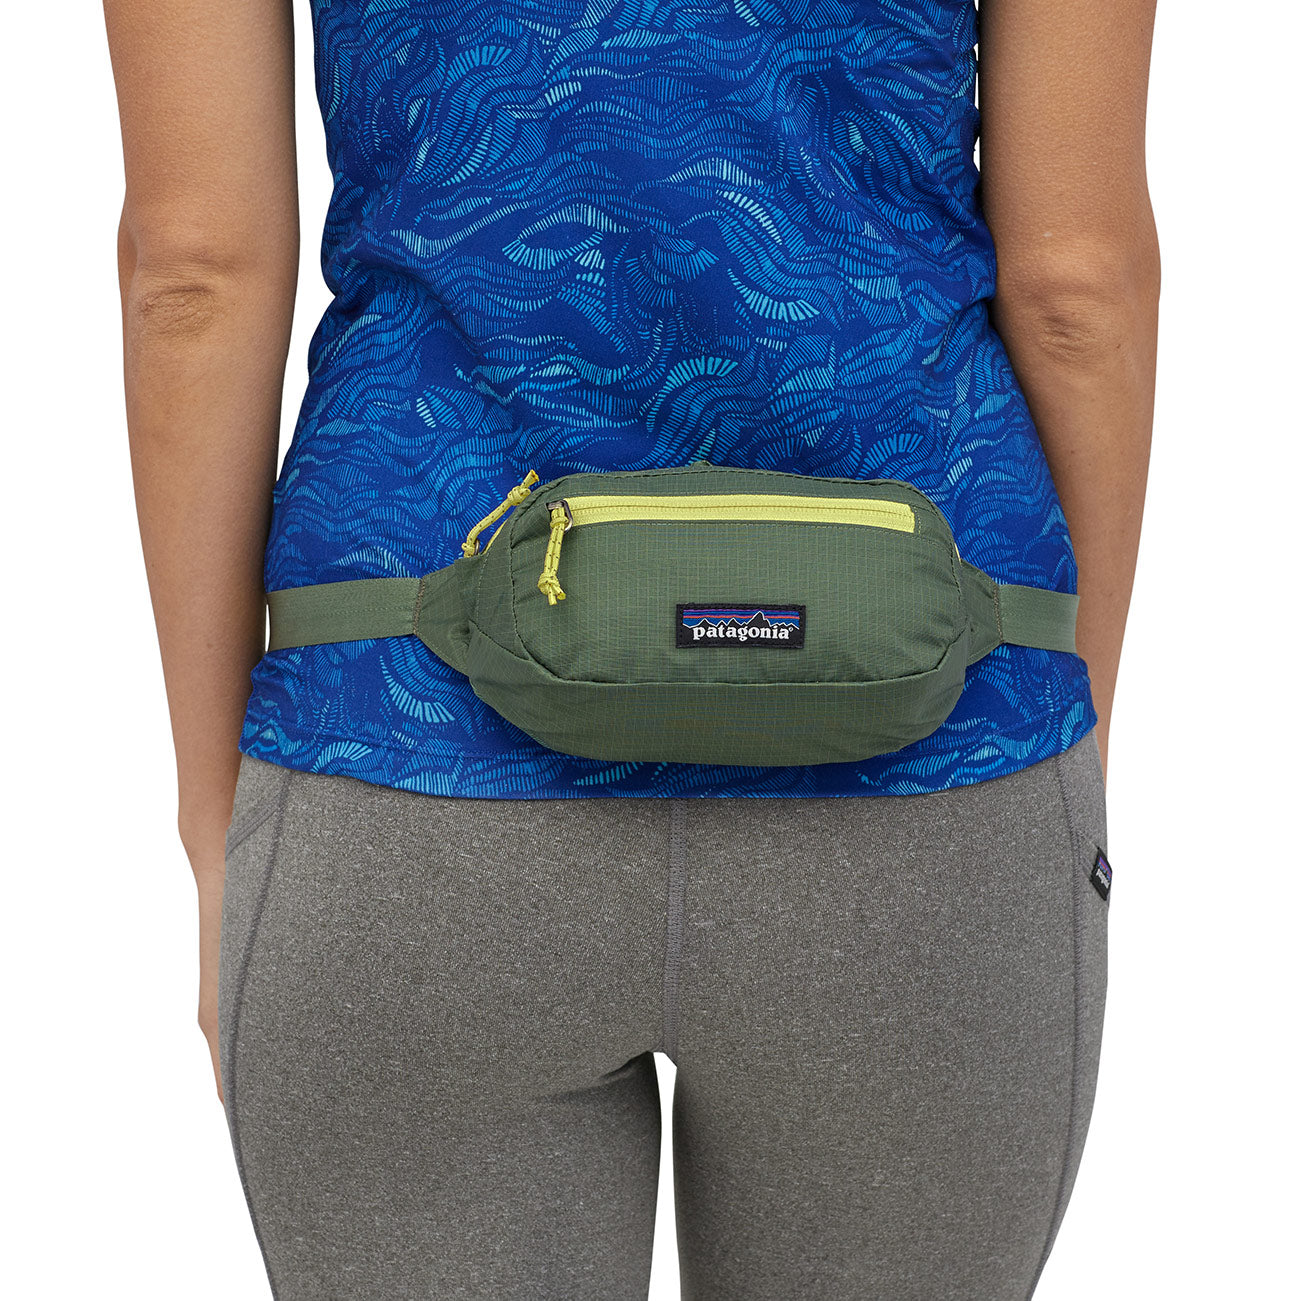 hip pack on live model in green with yellow zippers